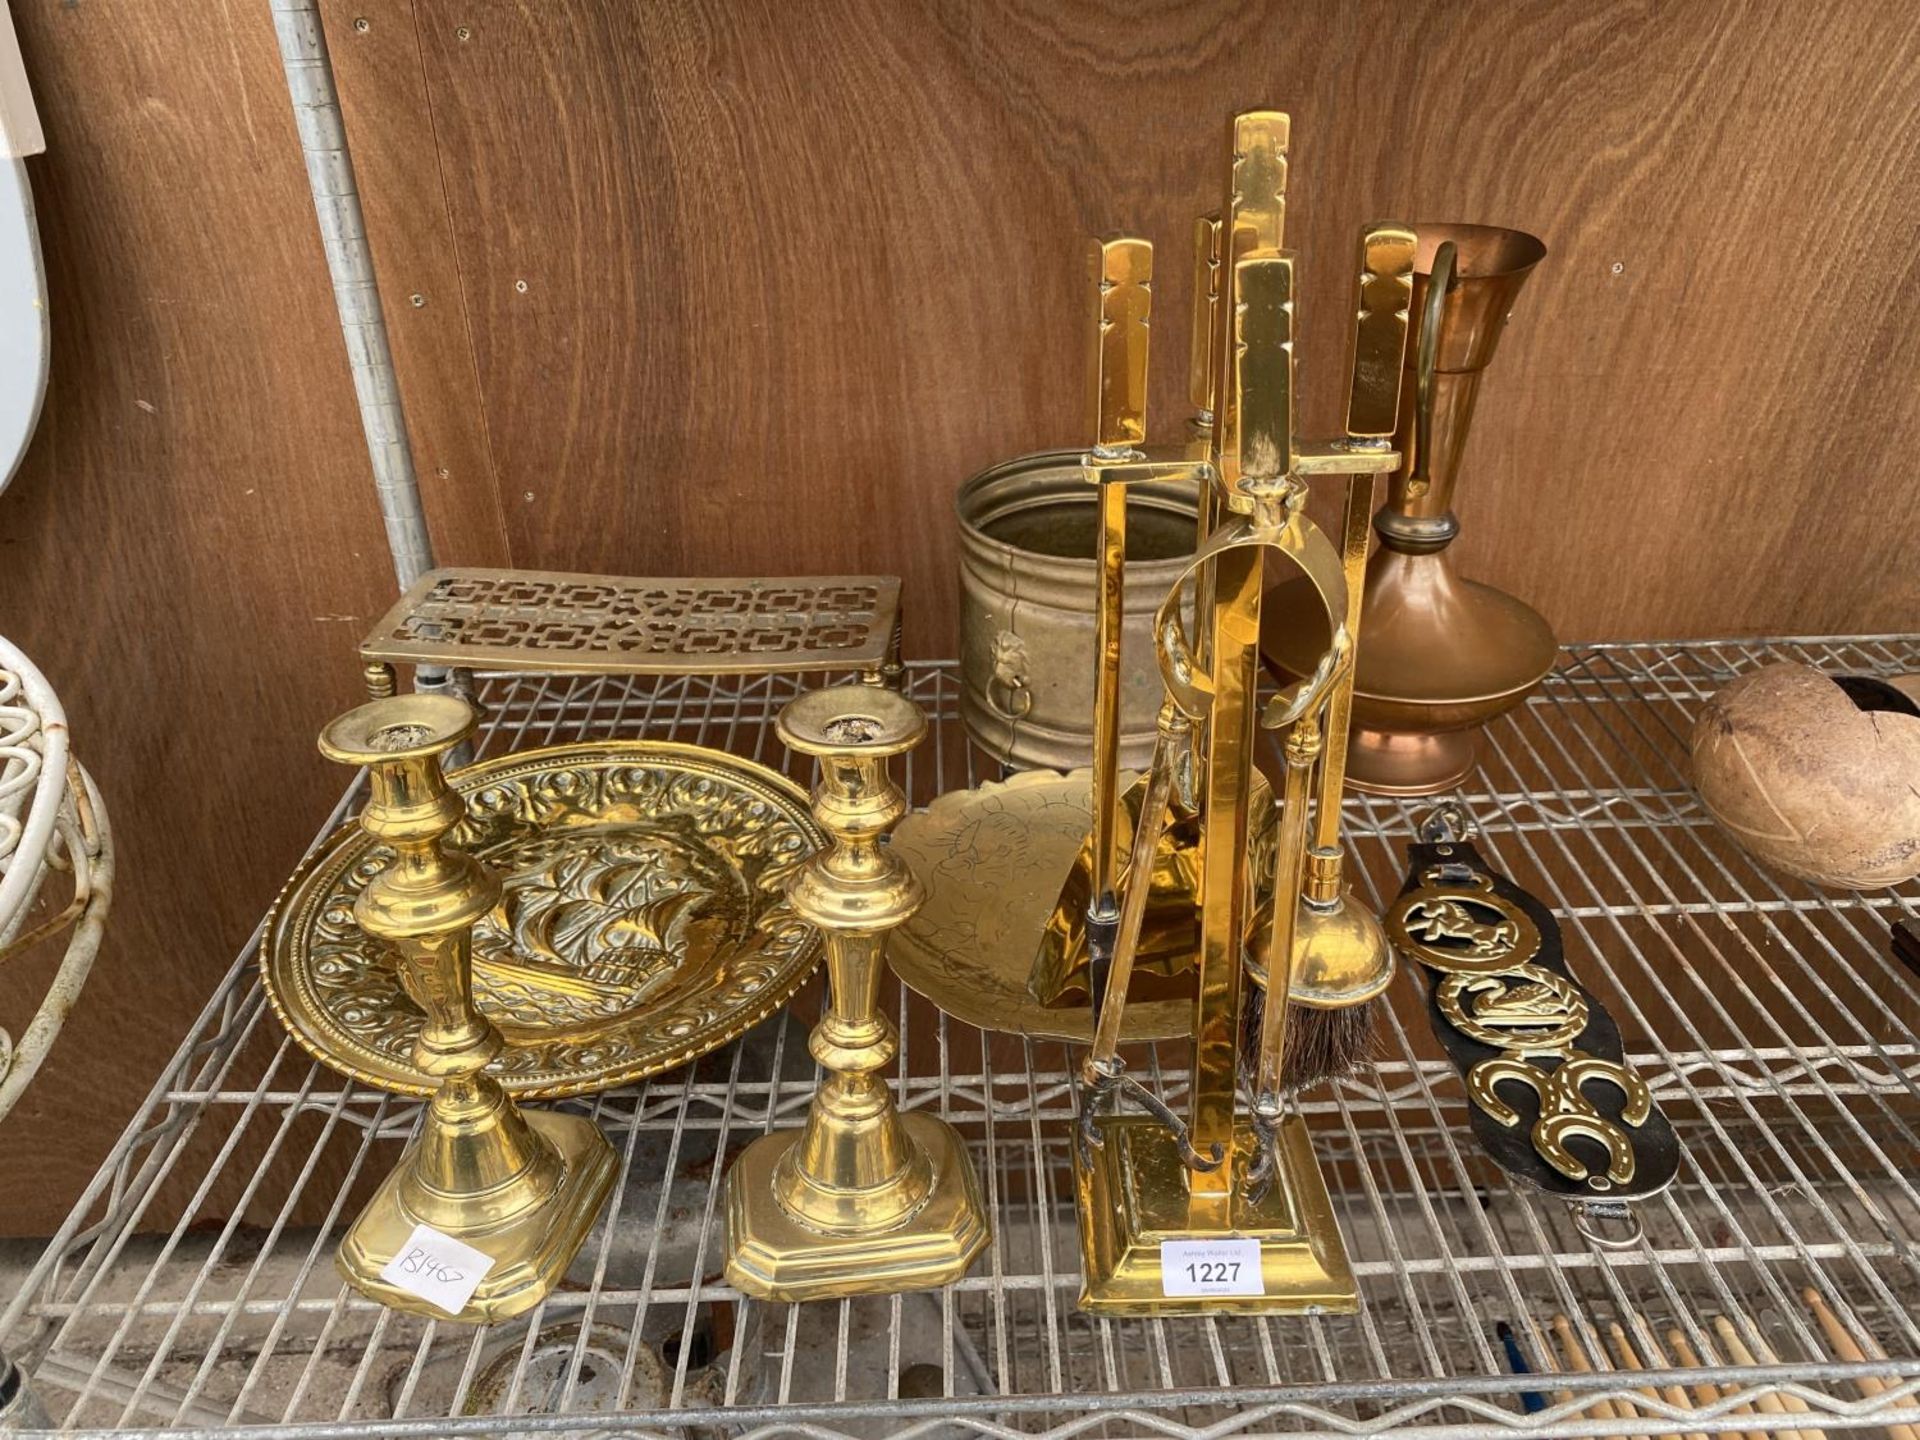 AN ASSORTMENT OF BRASS AND COPPER TO INCLUDE A BRASS FIRESIDE COMPANION SET, BRASS CANDLE STICKS AND